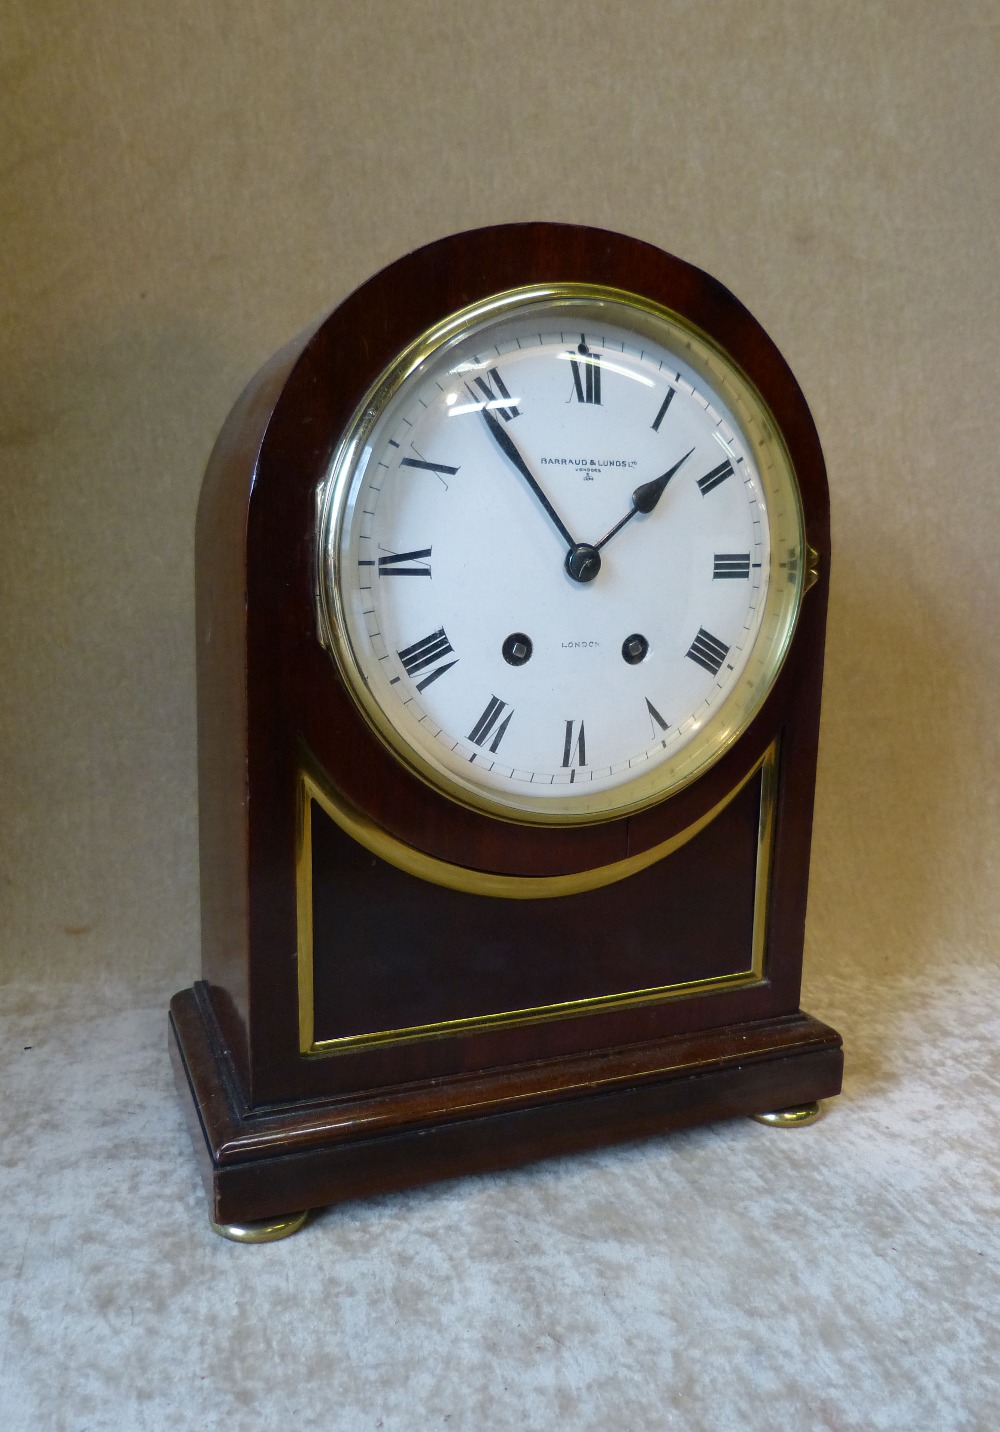 Vincenti Mahogany Arched Top 8 Day Striking Mantle Clock "Barraud & Lunds Ltd,